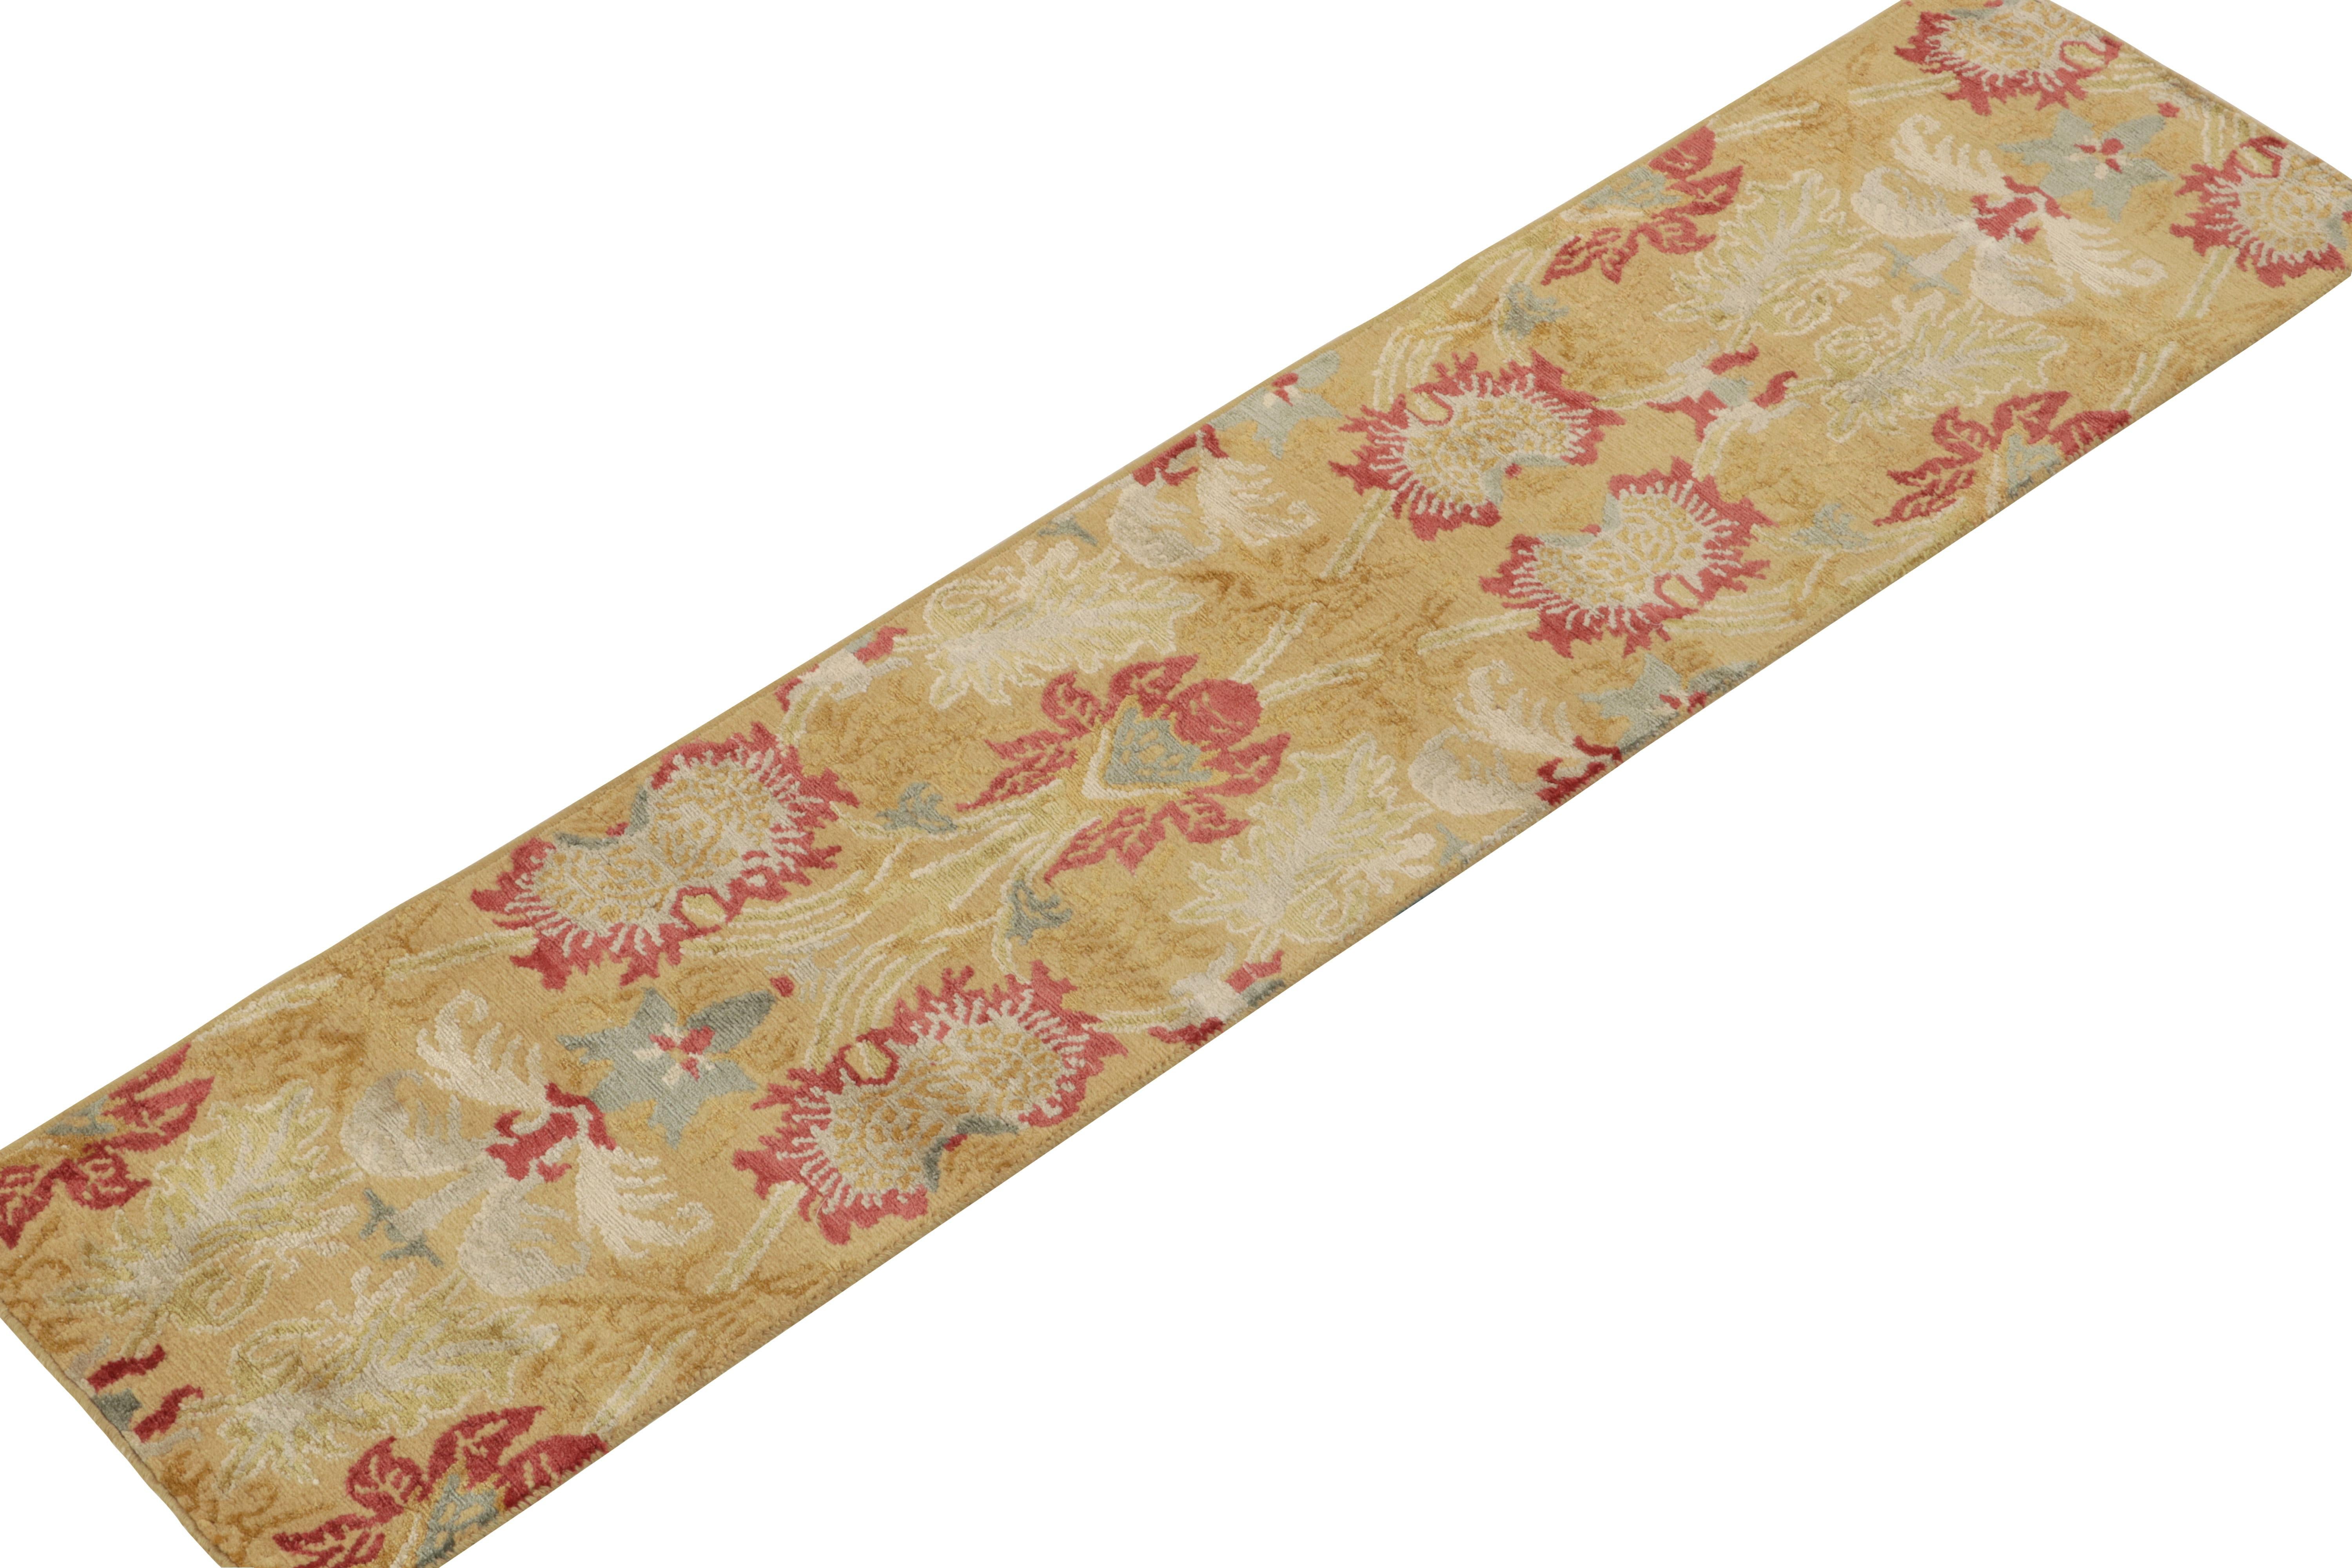 Modern Rug & Kilim's Spanish European Style Runner in Gold, Red & Blue Floral Pattern For Sale